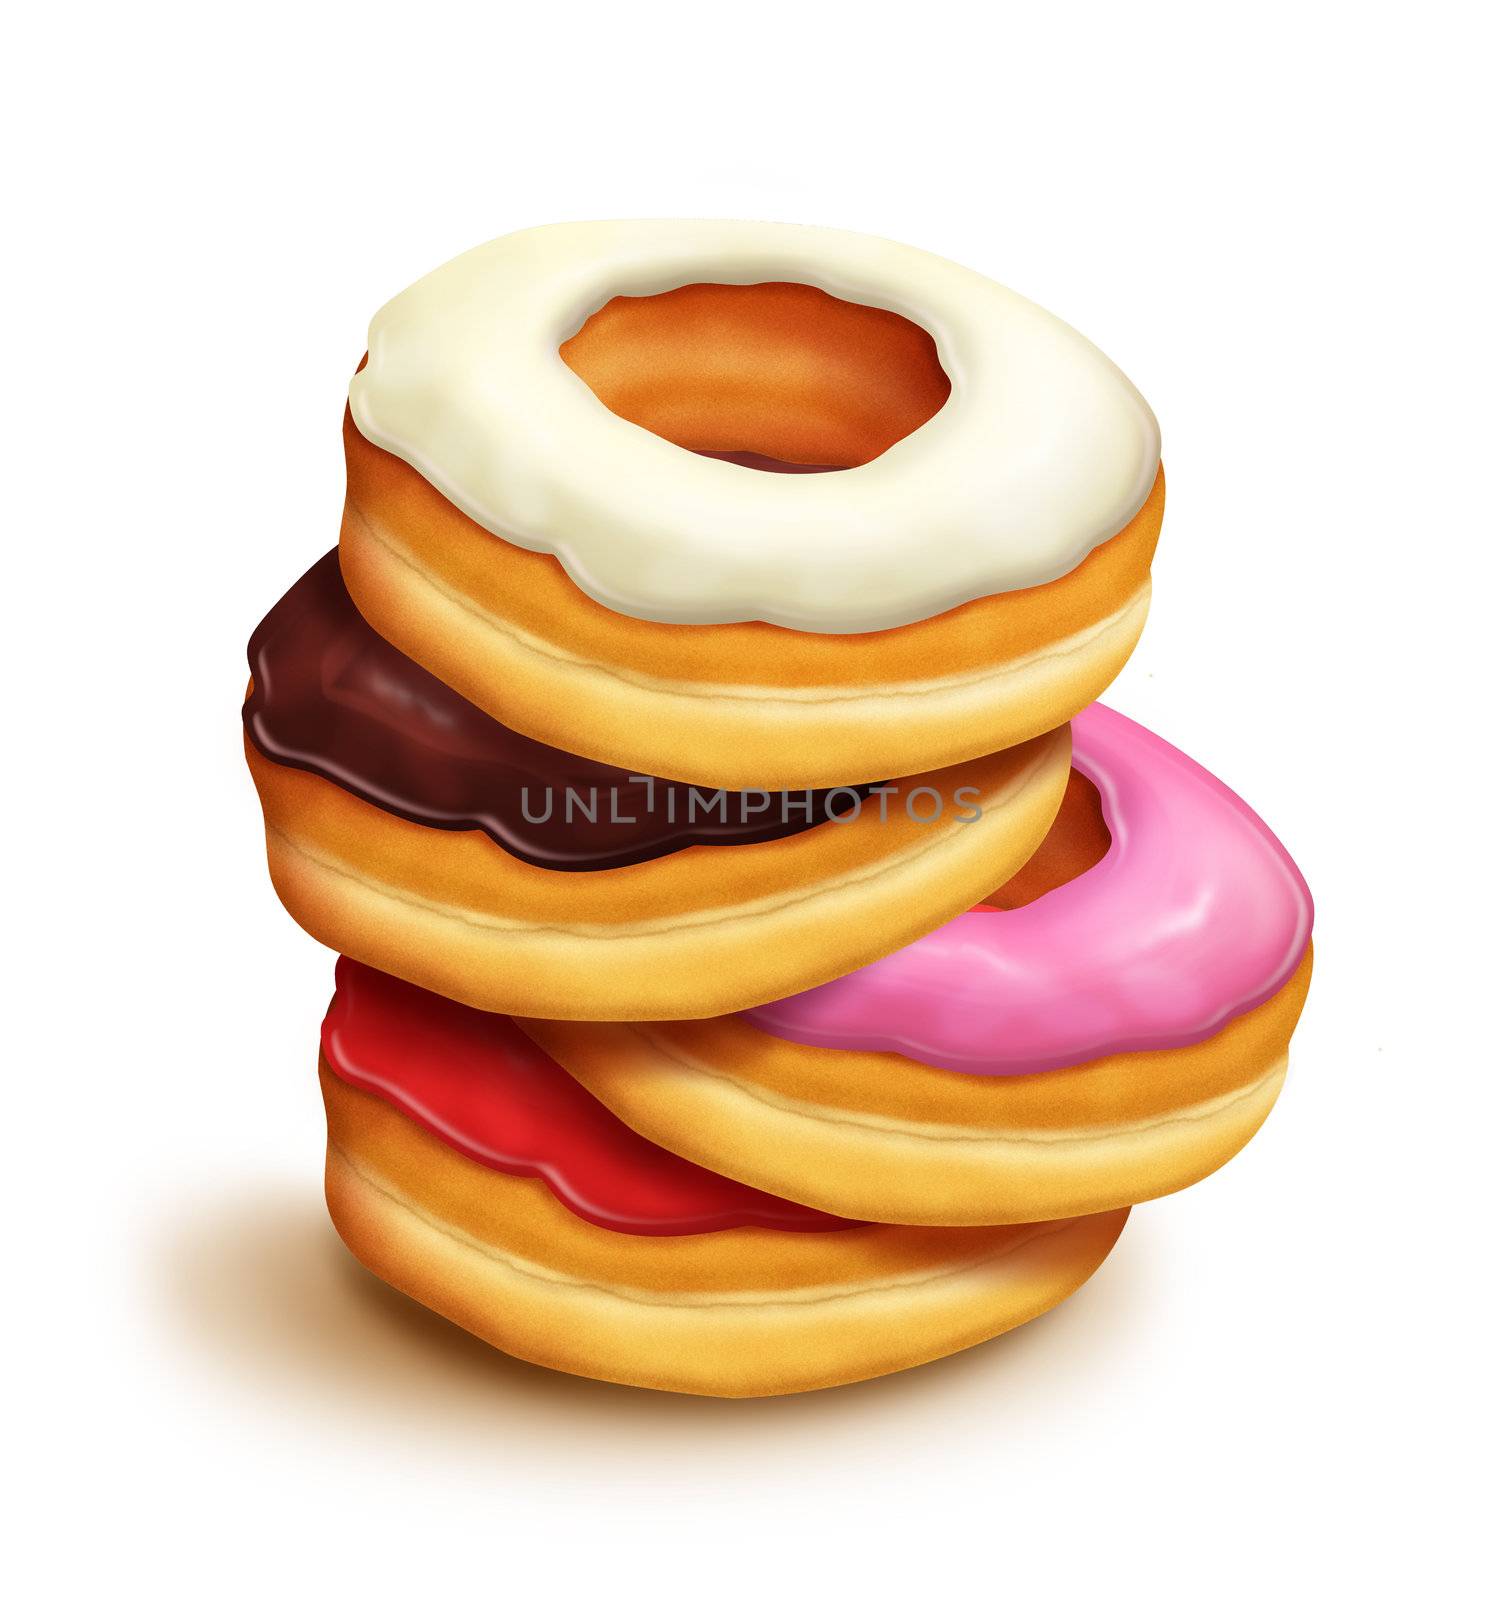 A Stack of Doughnuts with Icing by komodoempire